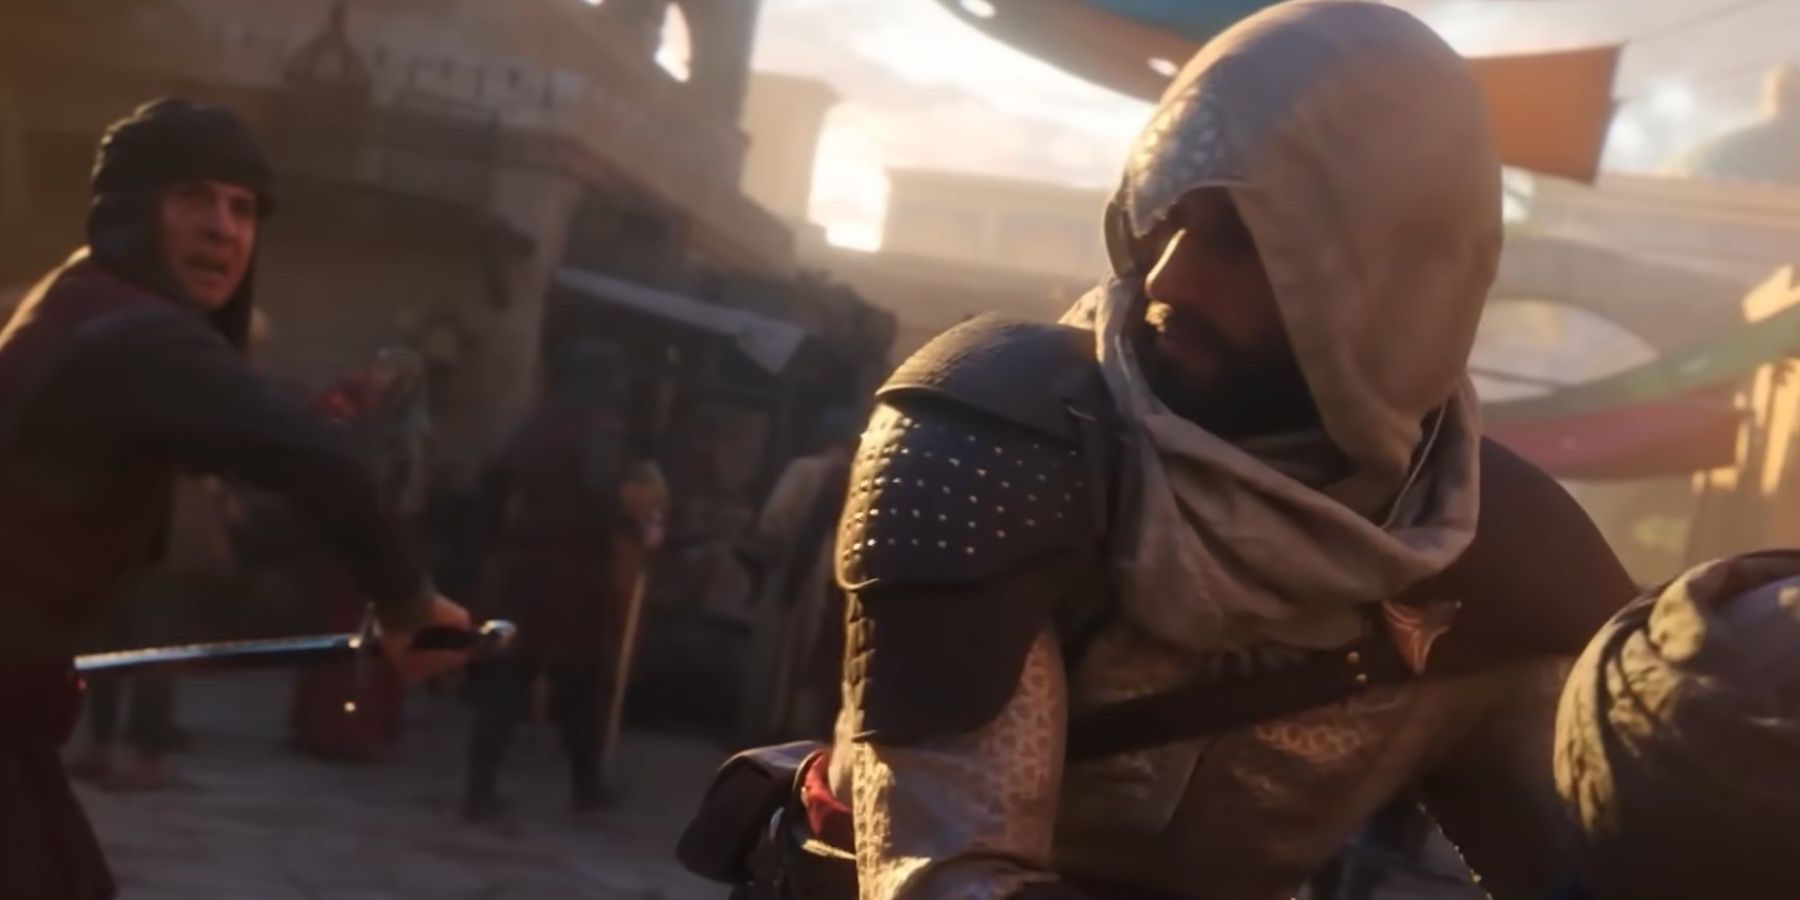 Assassin's Creed: Mirage™  Official Reveal [PS5] 